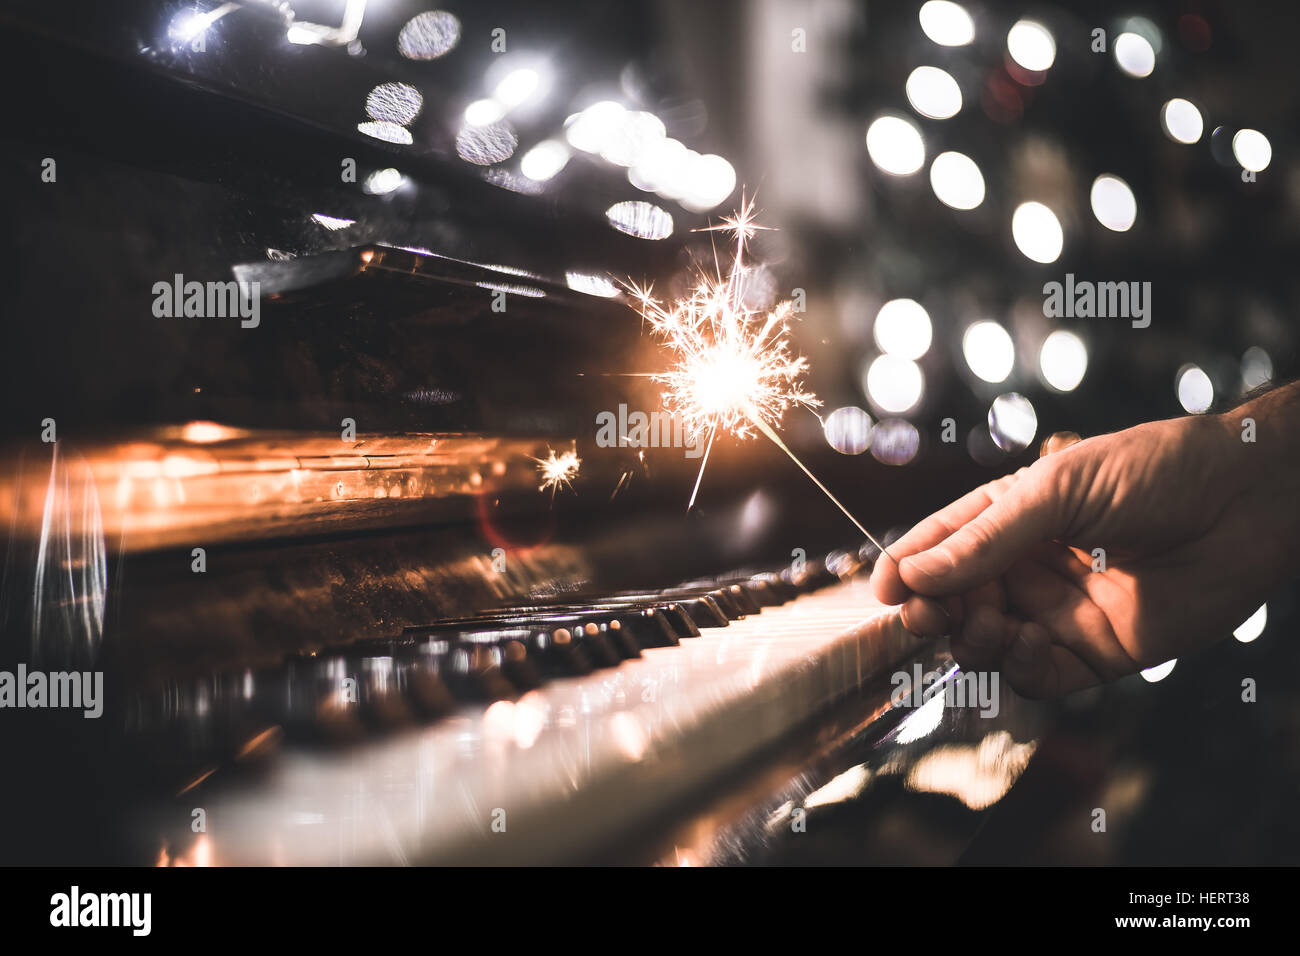 hand holding a sparkler over a piano Stock Photo